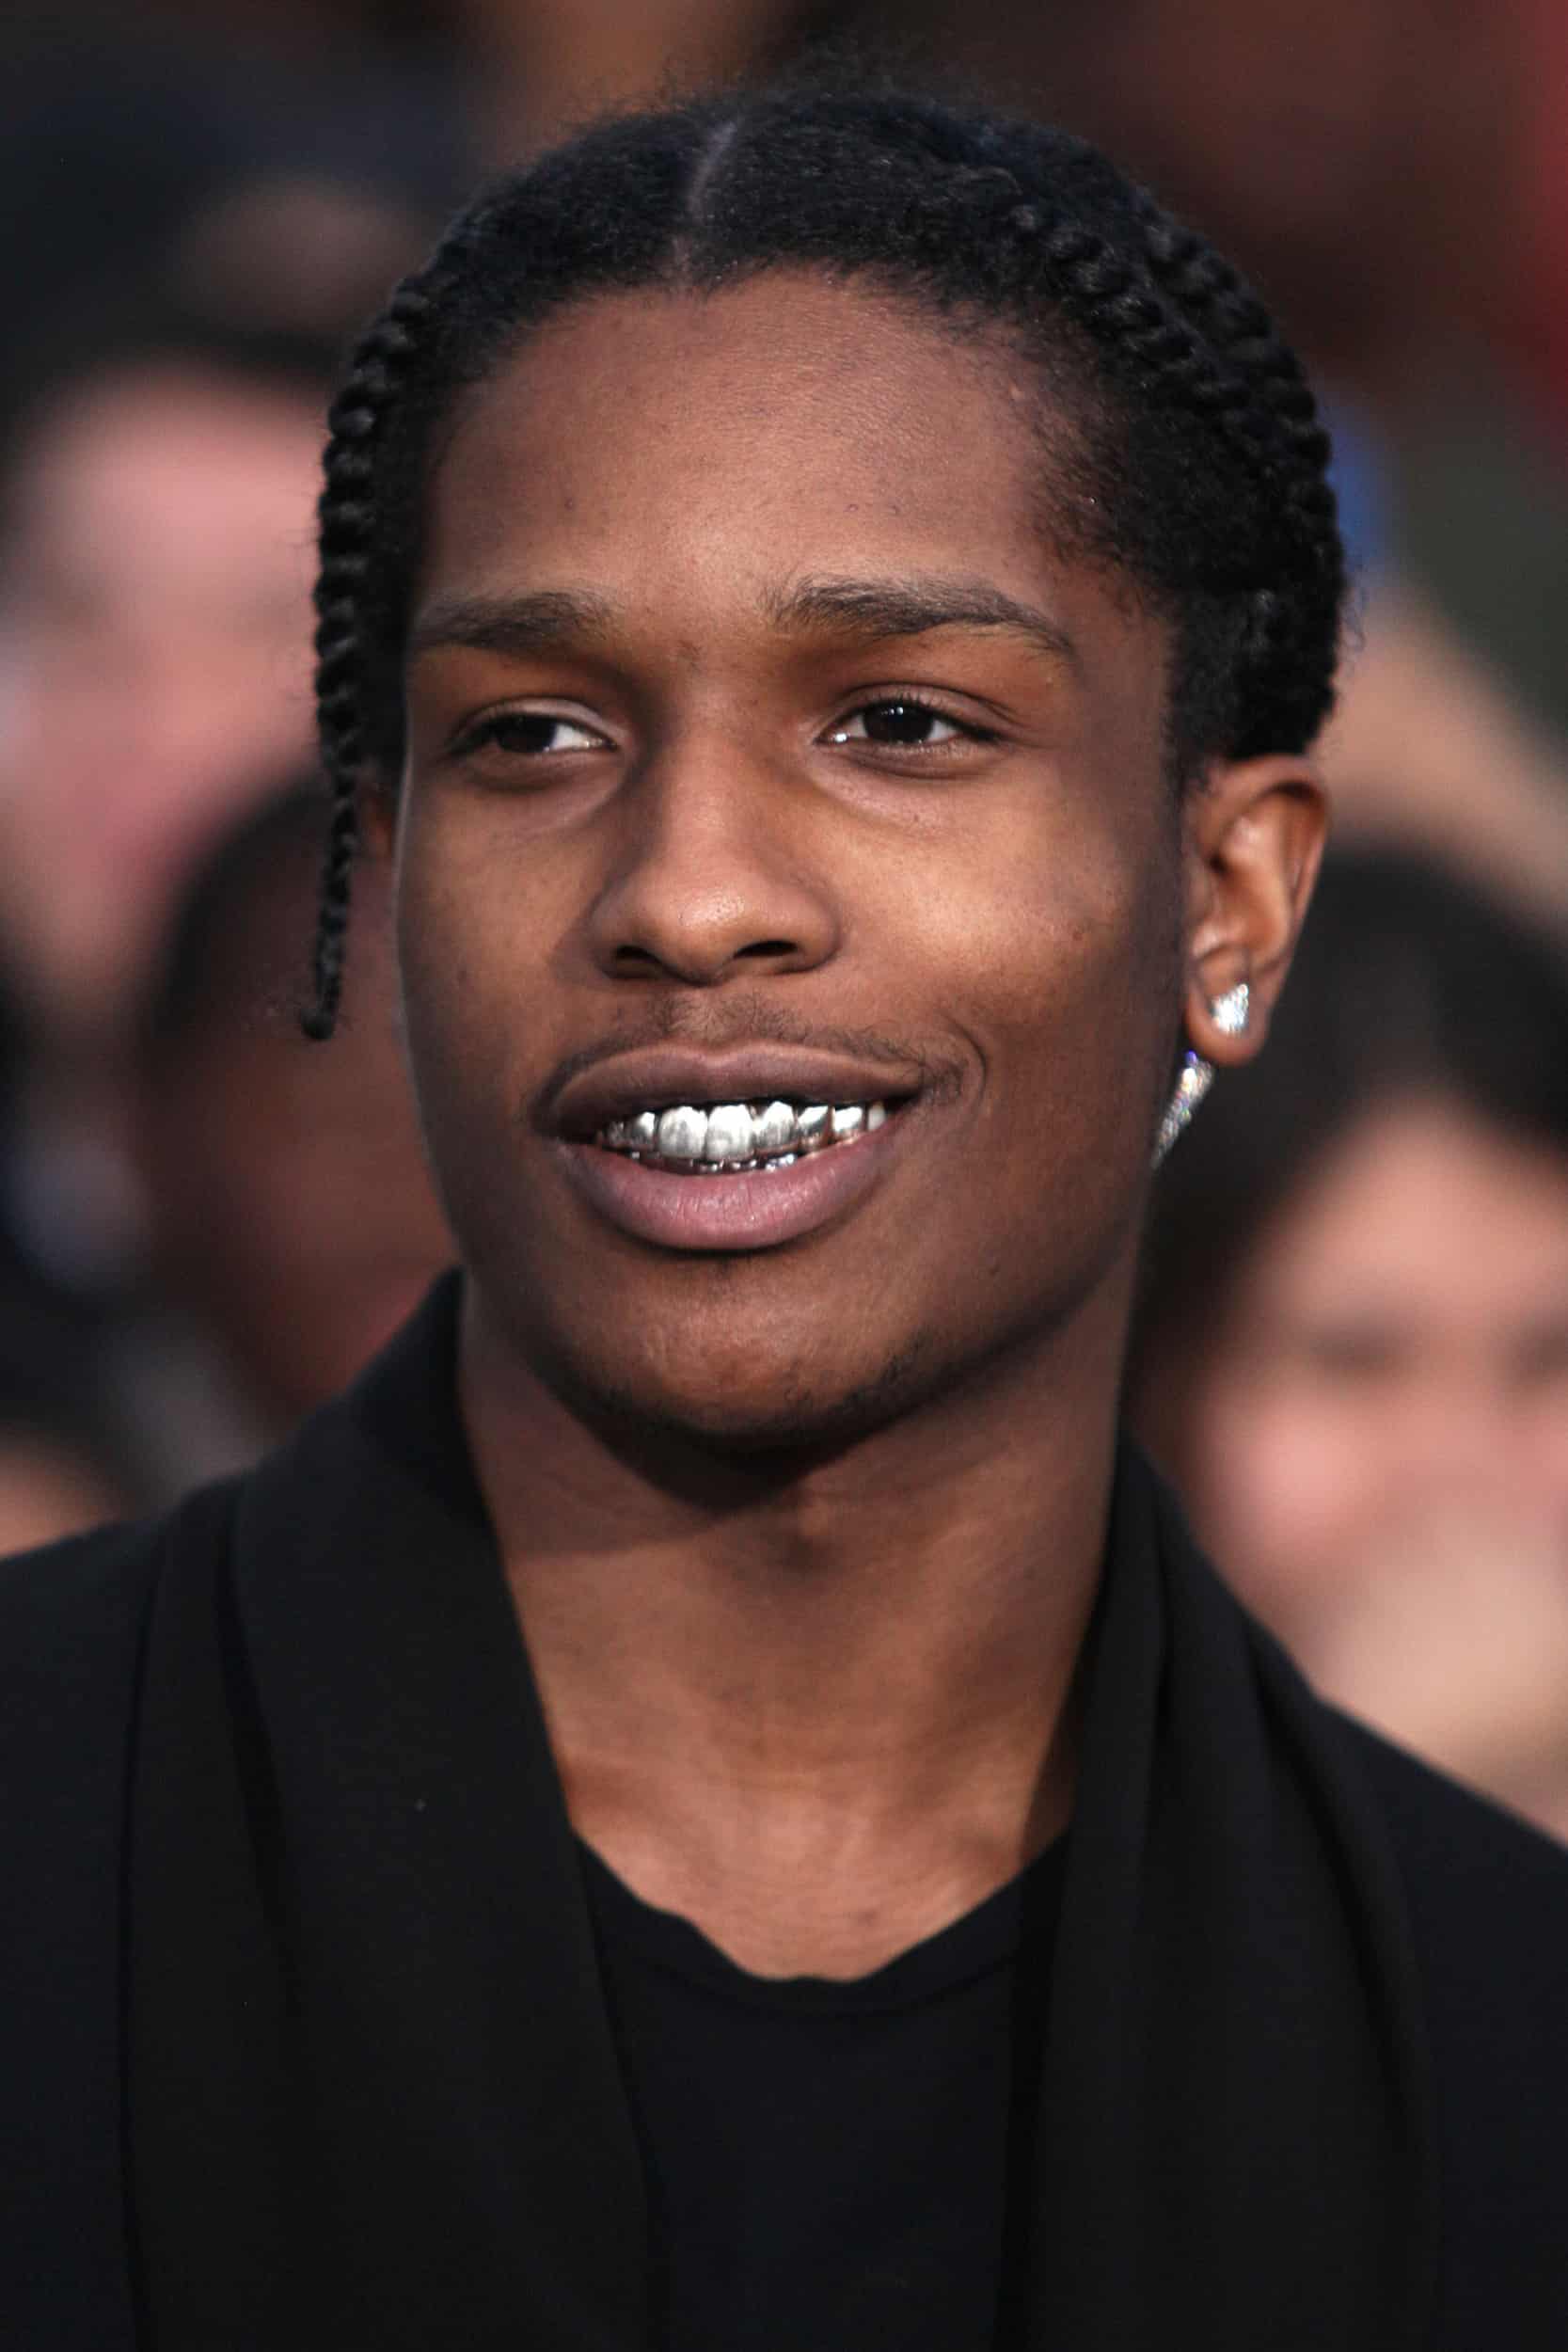 Does ASAP Rocky Have Tattoos?